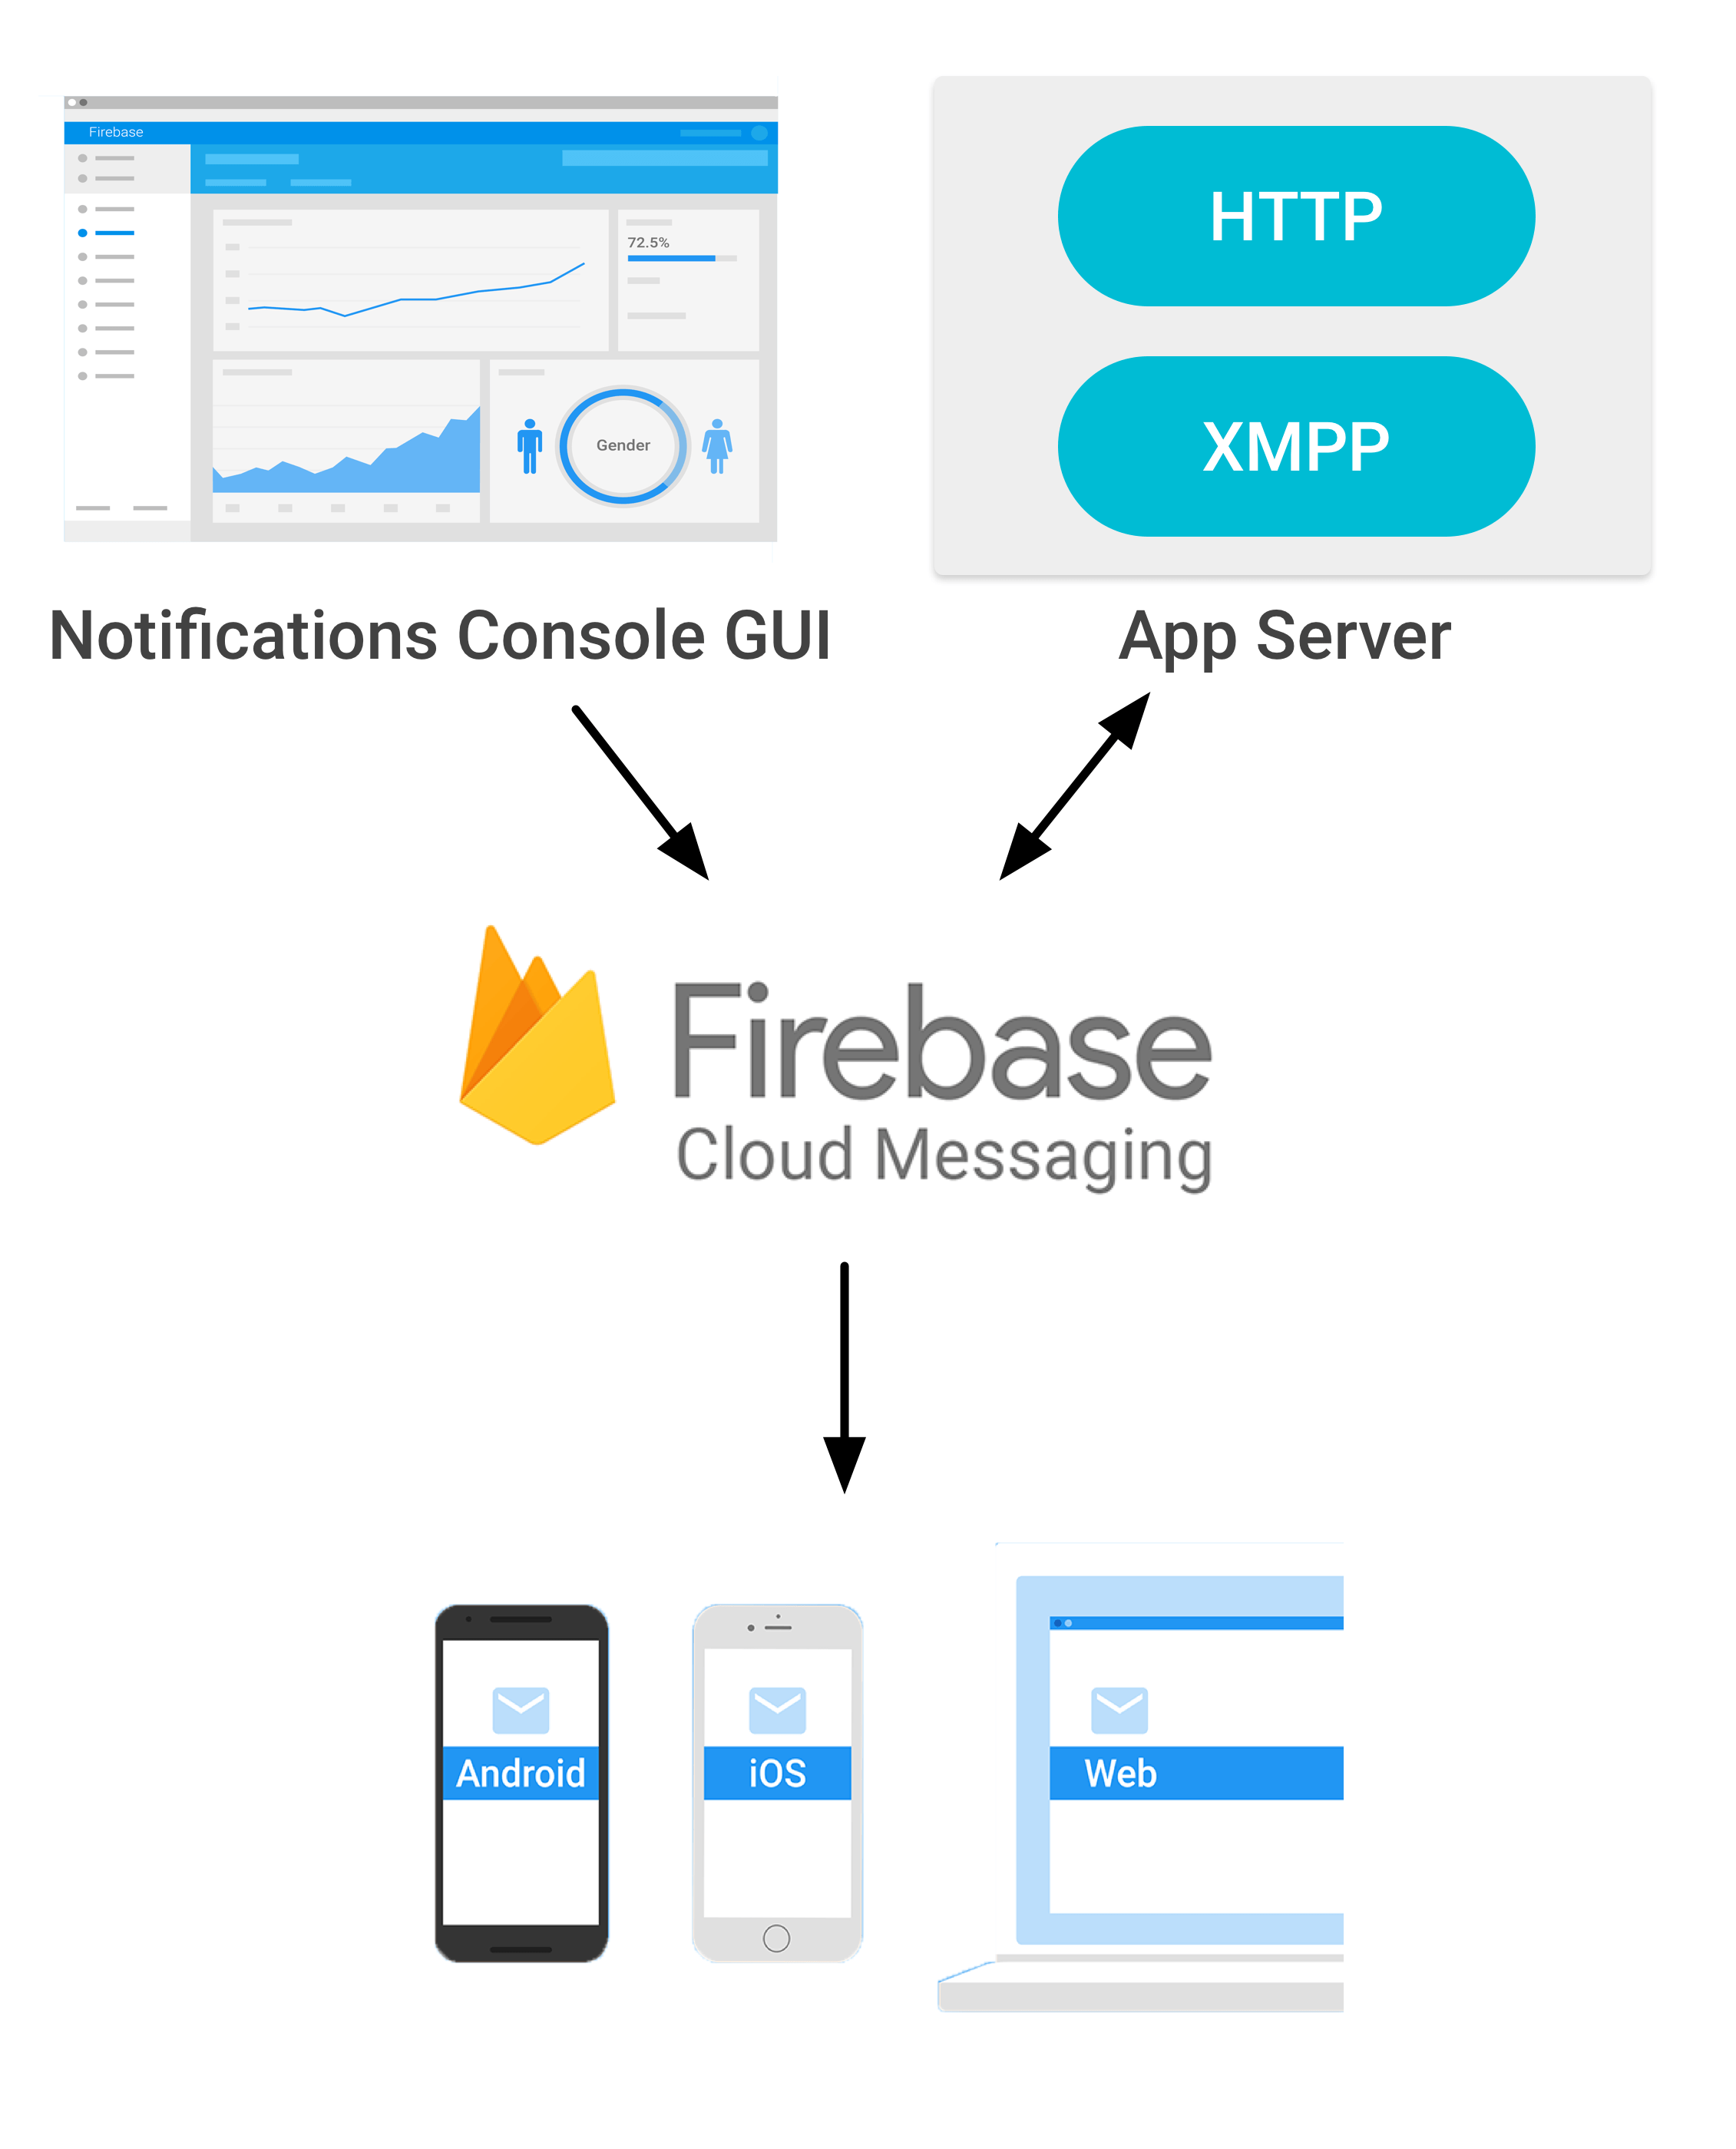 The two ways to send messages to device with Firebase